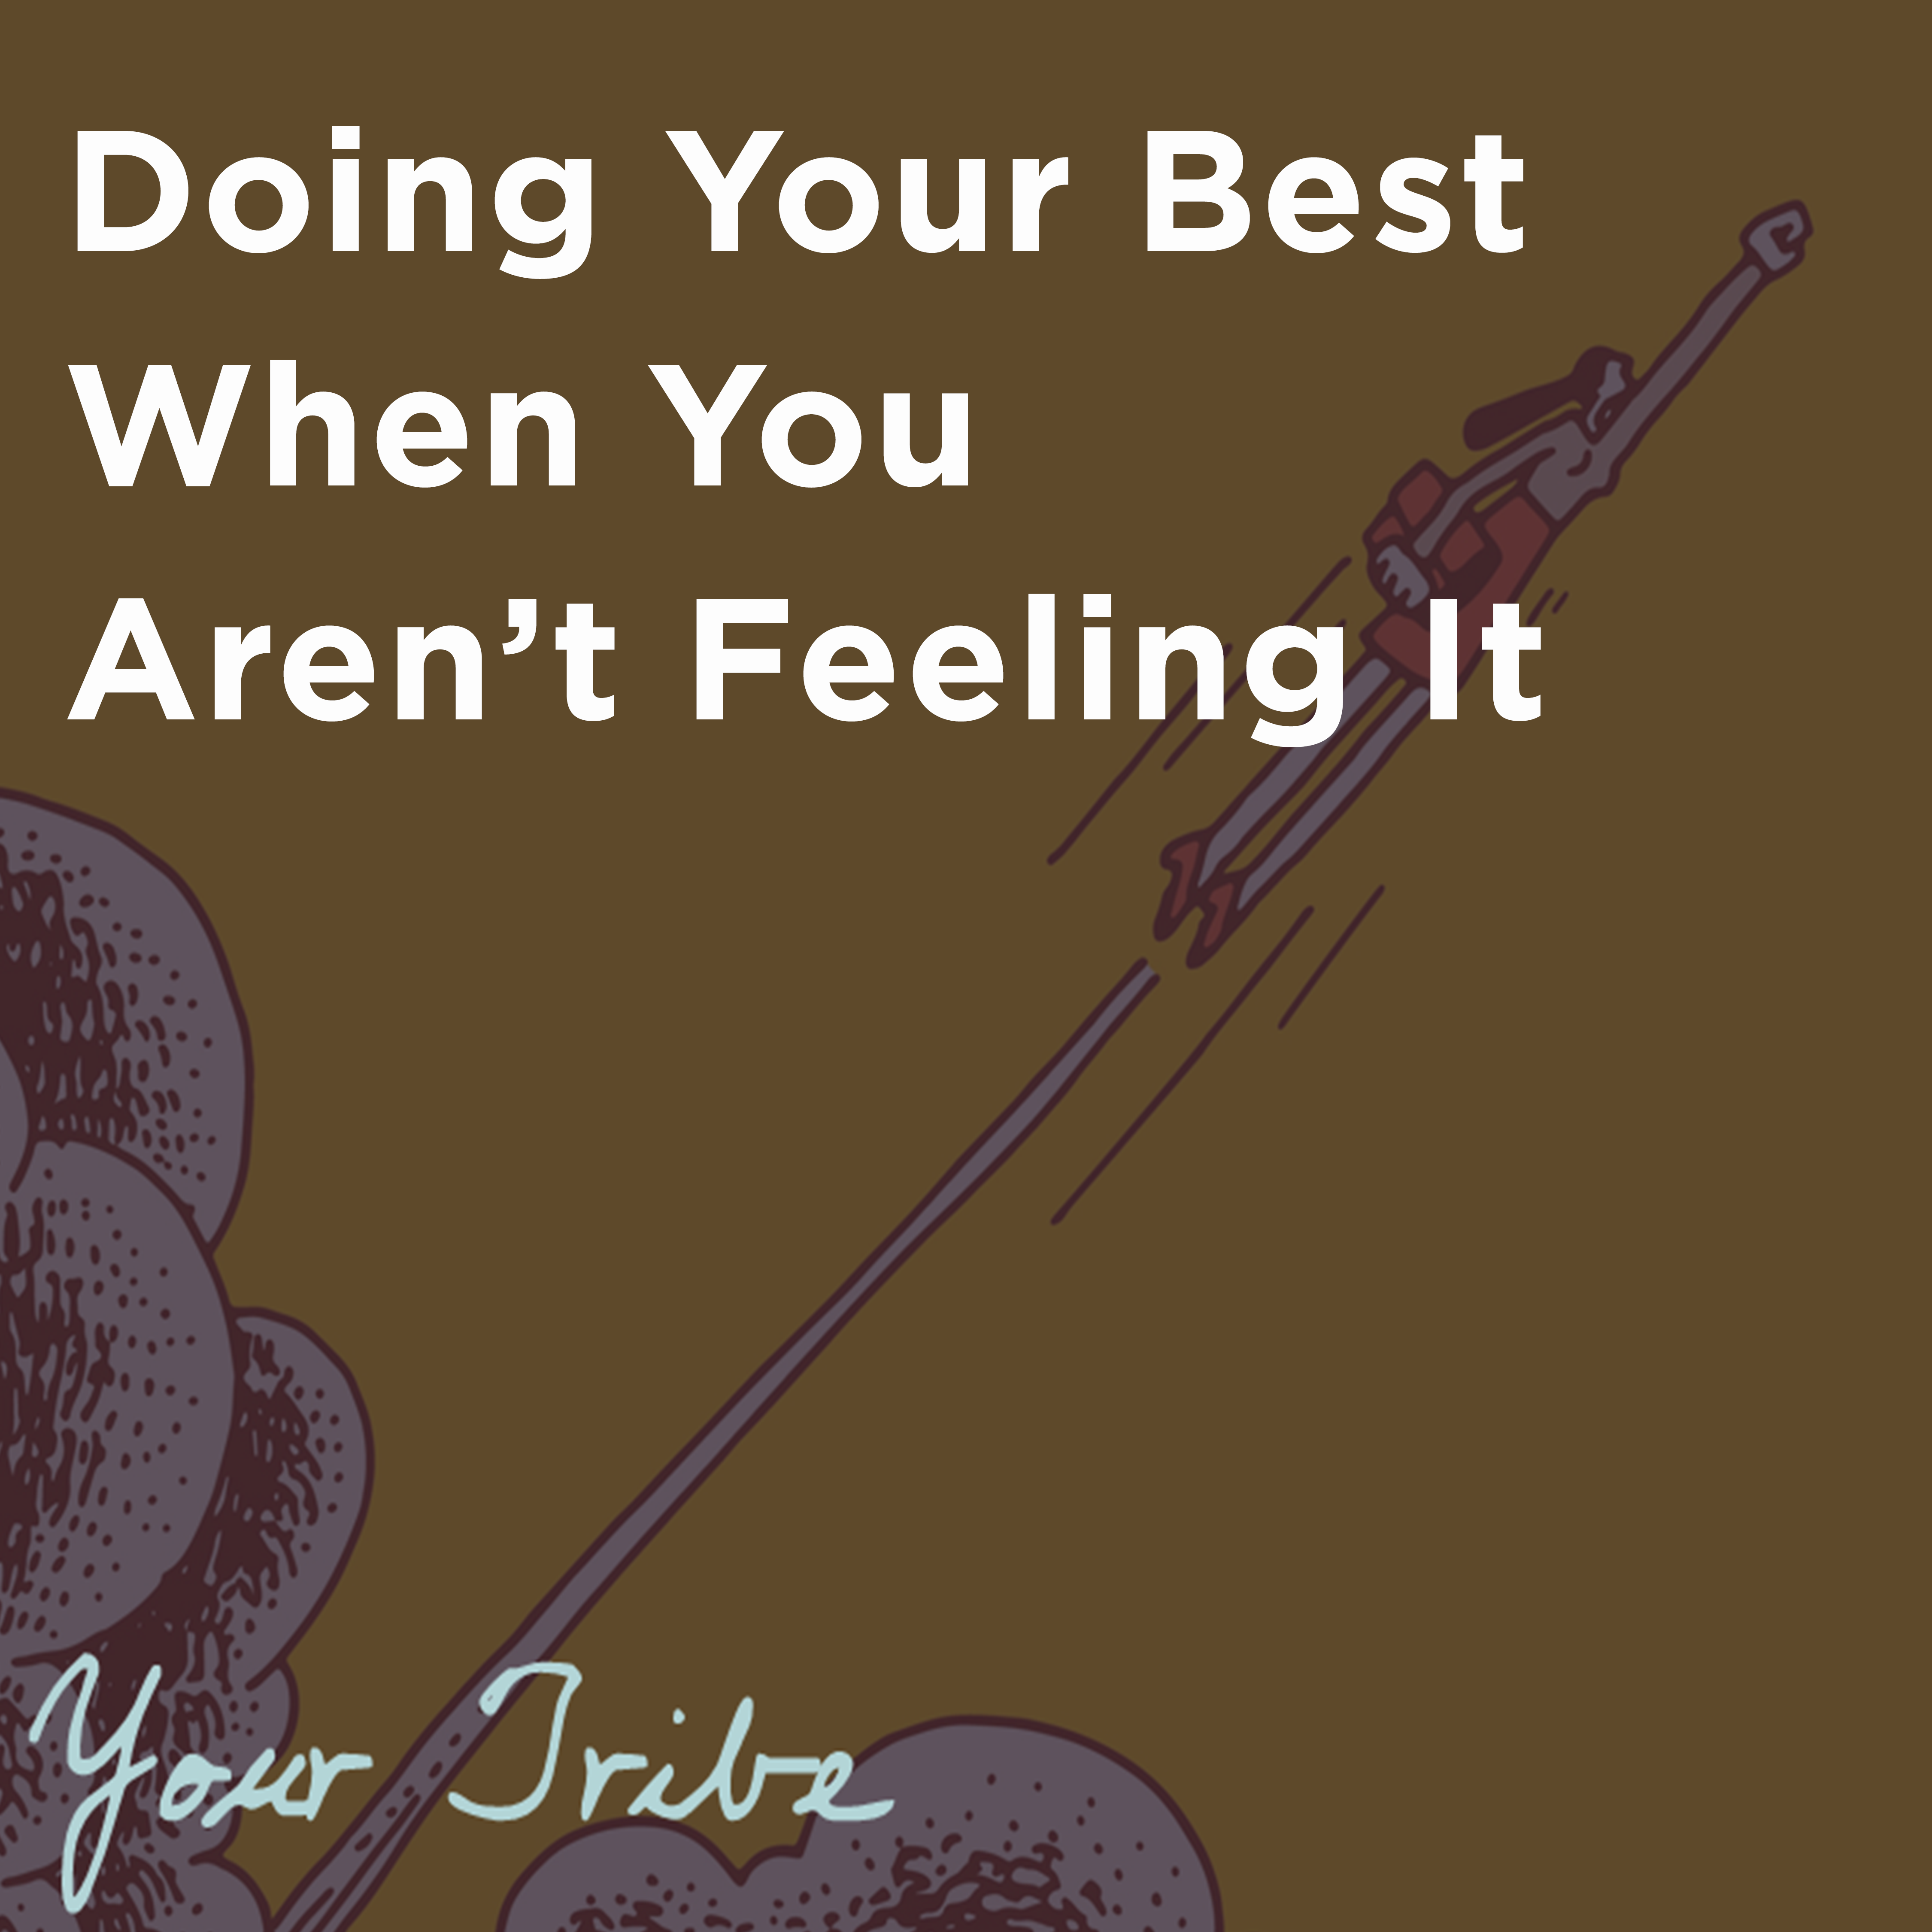 Doing Your Best When You Aren't Feeling It